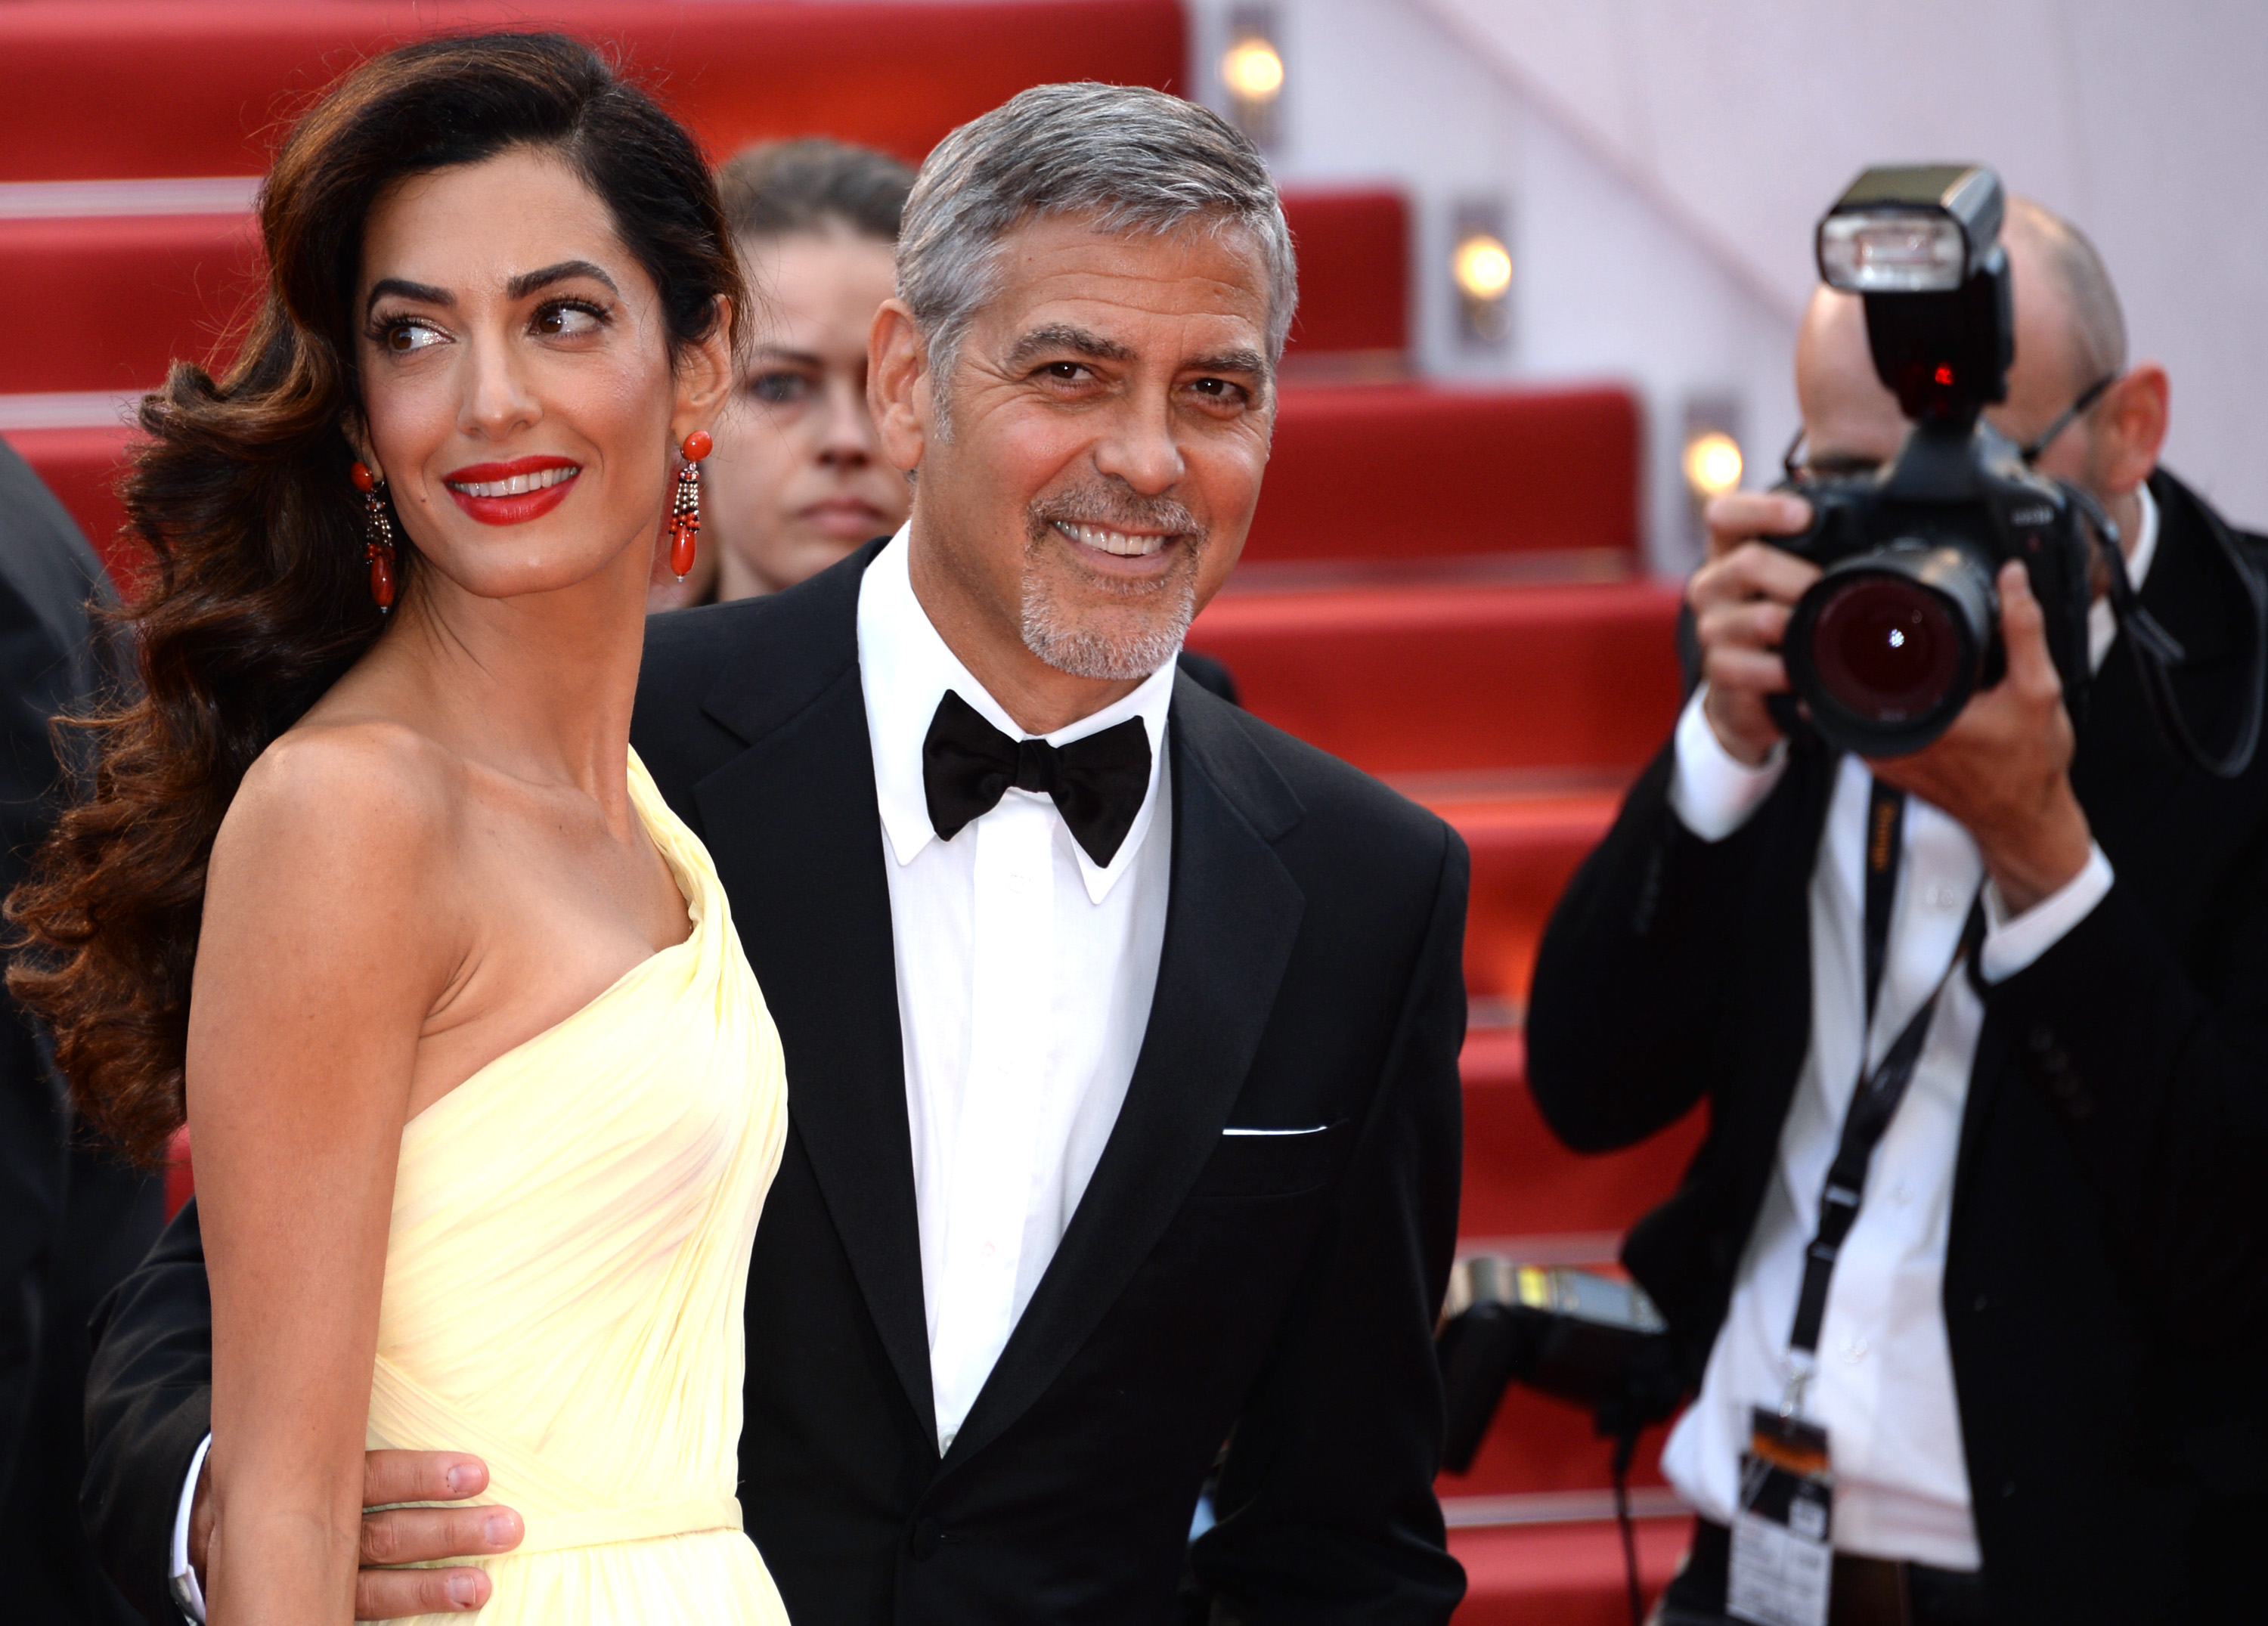 George Clooney and his wife Amal Clooney attending the "Money Monster" premiere at the Palais des Festivals on May 12, 2016, in Cannes, France | Source: Getty Images